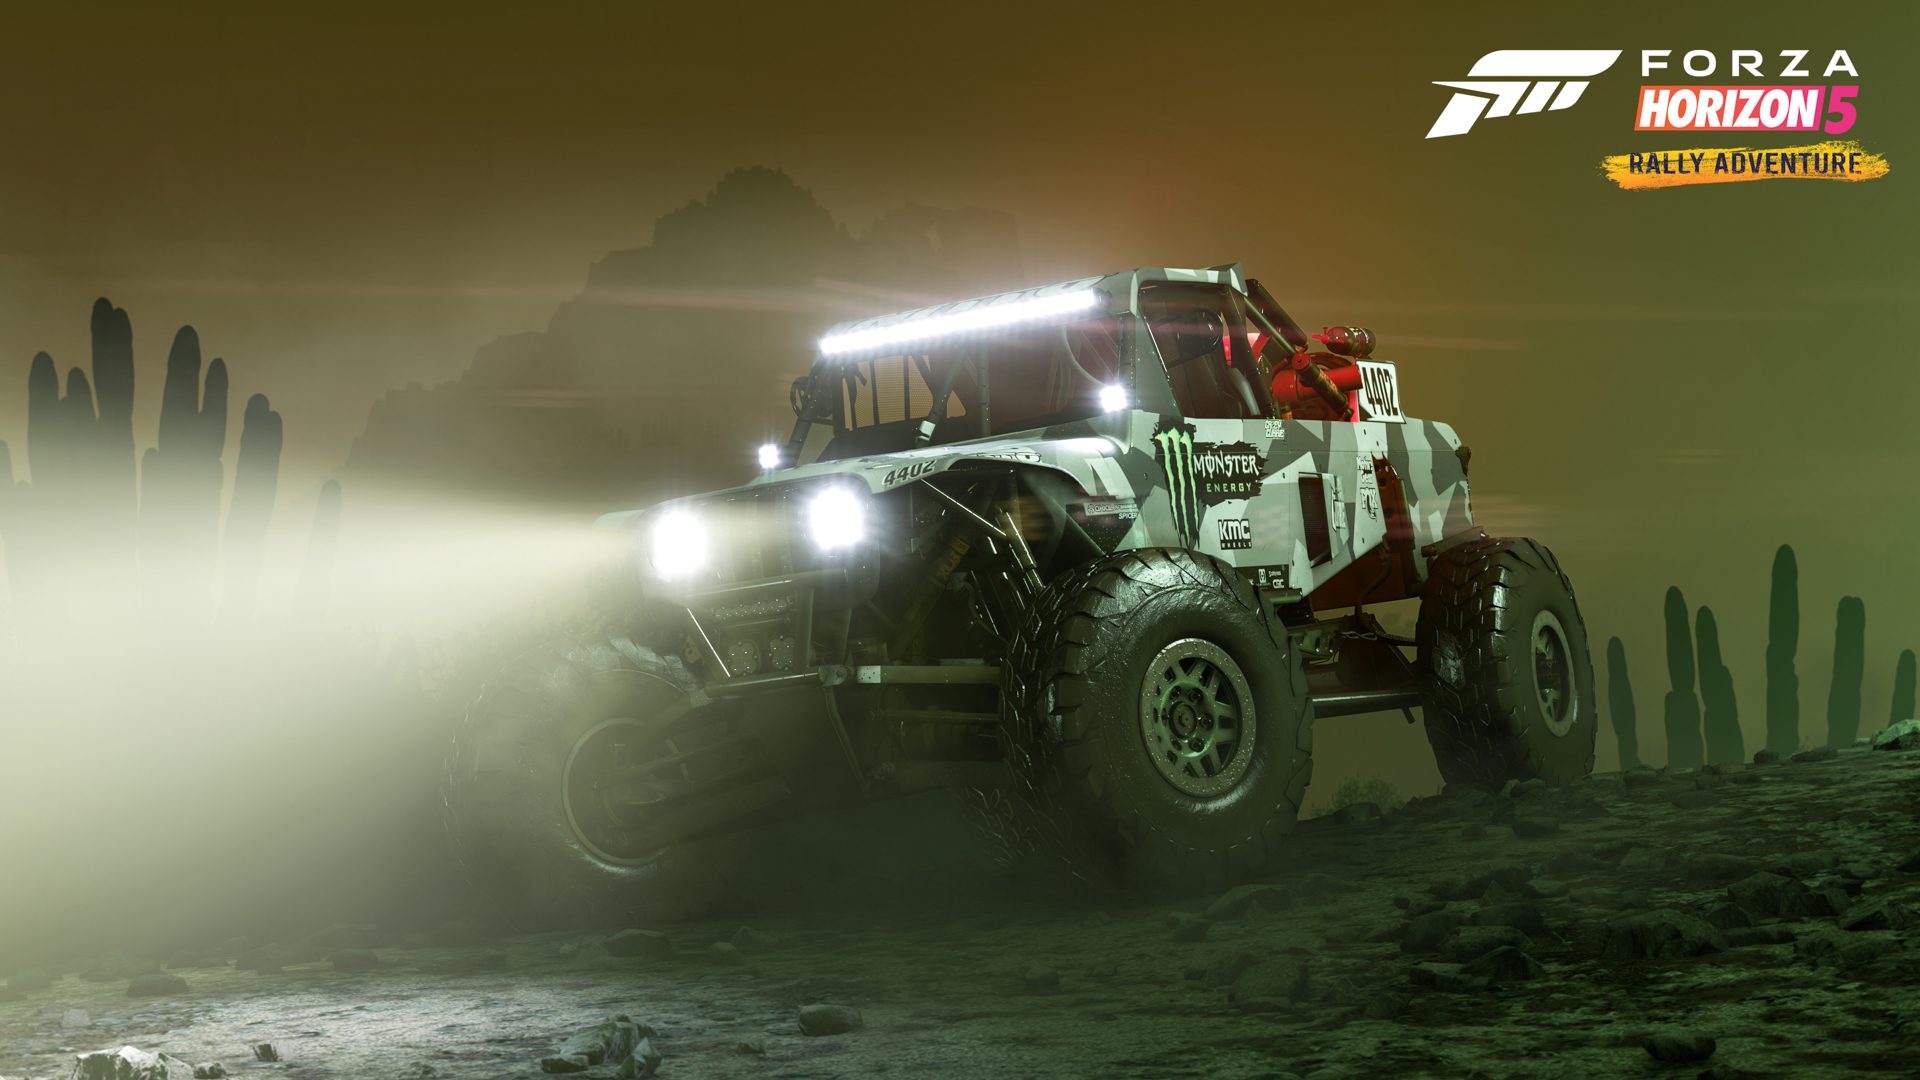 fh5-rally_adventure_expansion-casey_currie_motorsports_4402_ultra4_trophy_jeep-steam-1920x1080_wm-a45311074fed5824d7ba-4985167